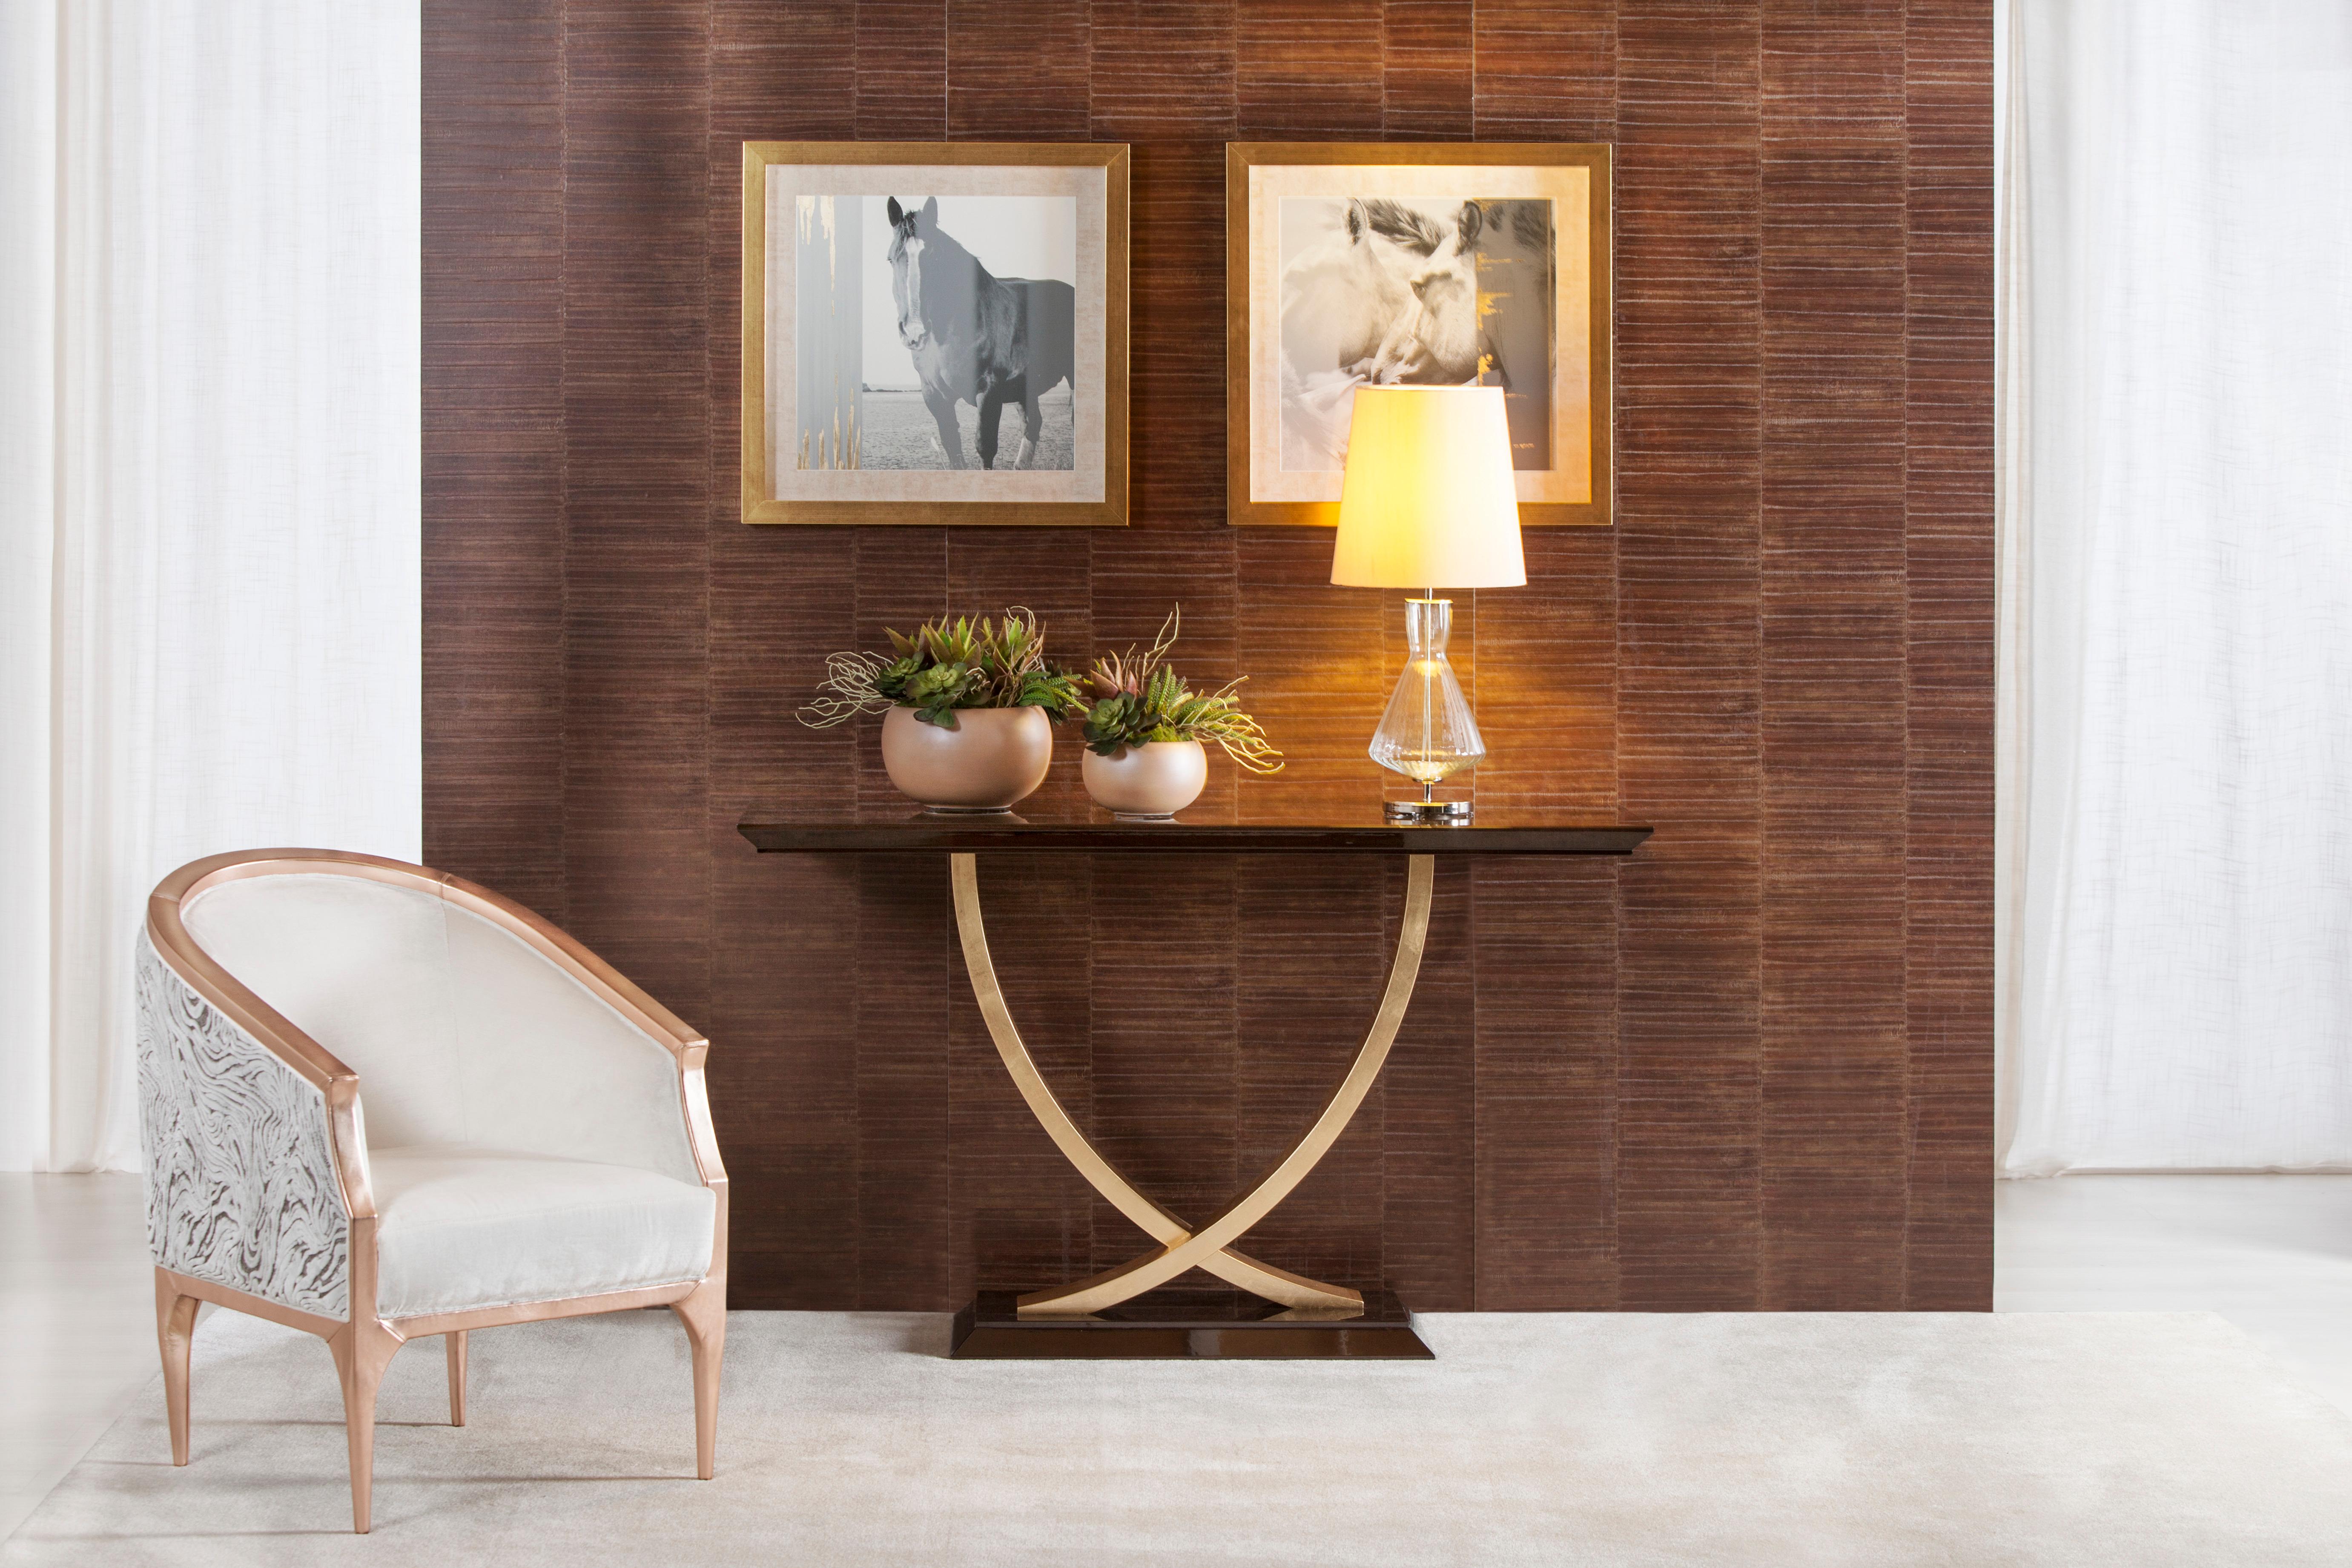 Fontaine Console, Modern Collection, Handcrafted in Portugal - Europe by GF Modern.

The Fontaine console table is named after Jean de La Fontaine, a French poet and fabulist, reflecting the Art Deco style that symbolises the dawn of a new modern